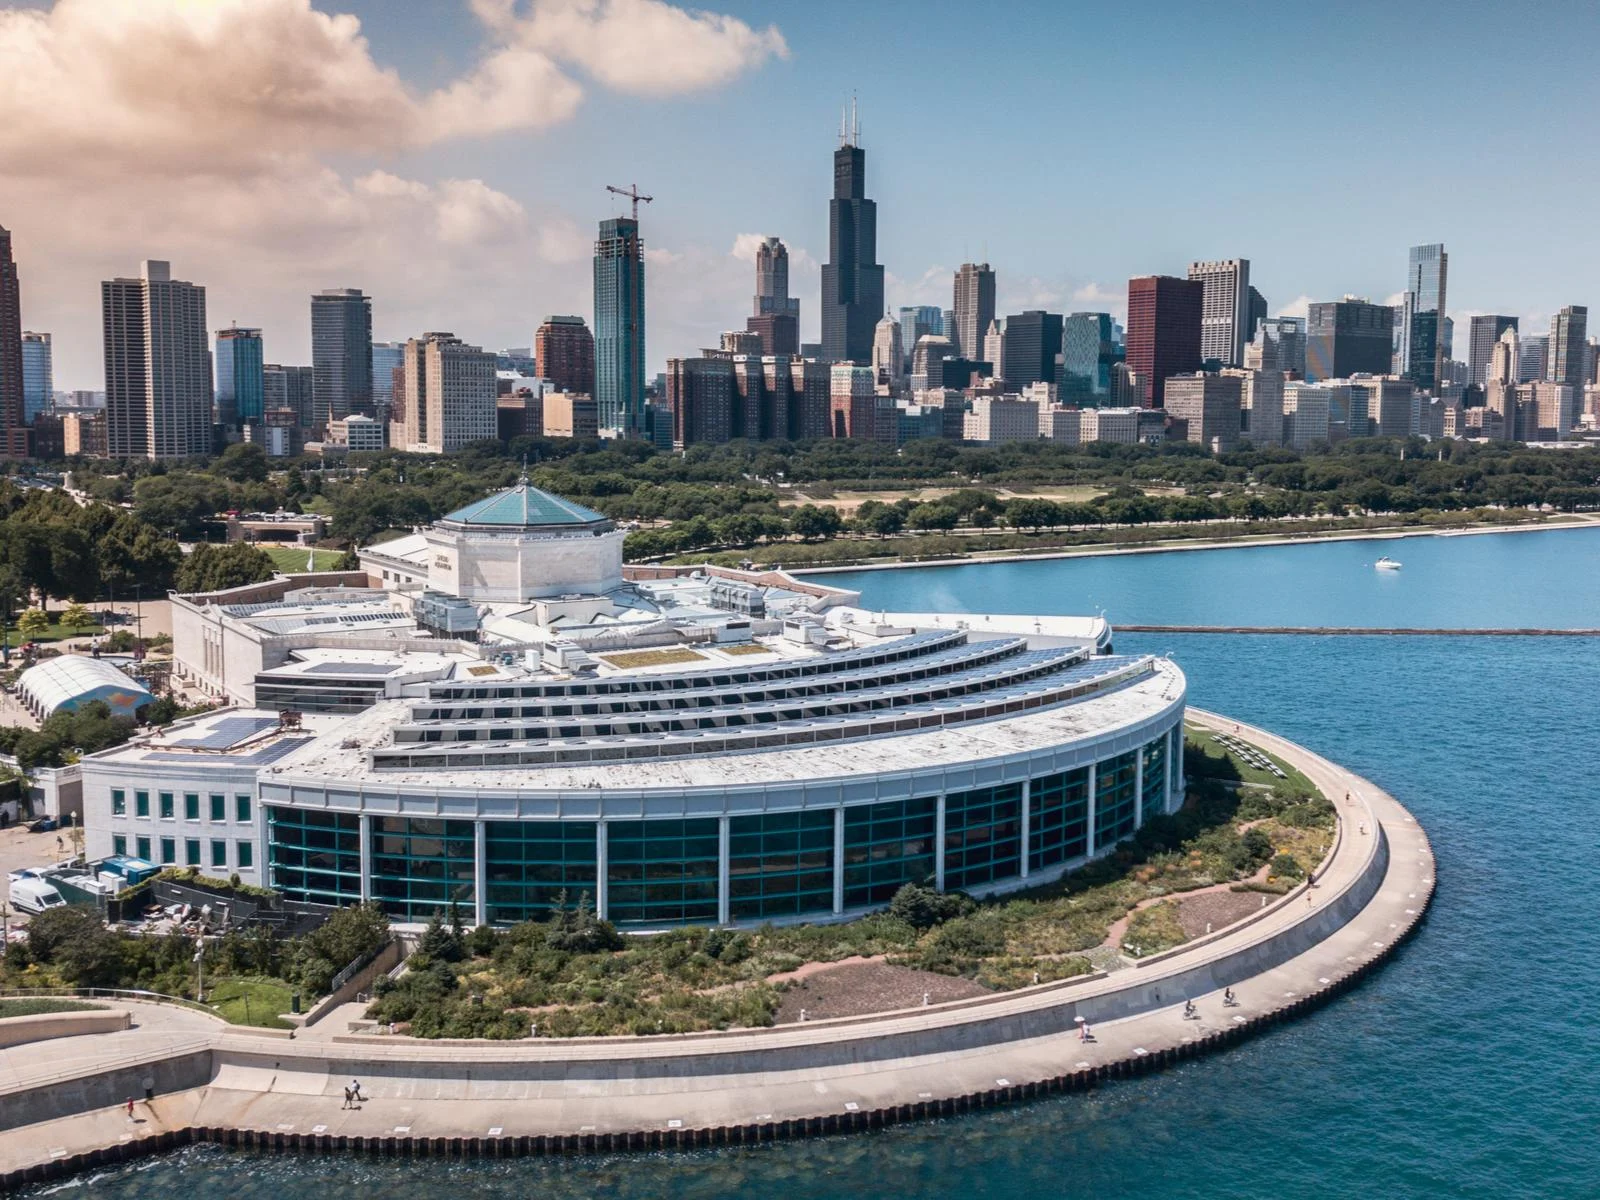 Aerial view of the rounded architecture on Shedd Aquarium, one of the best aquariums in the US, with the Chicago skyline in the background and a few people walking along the seaside pathway